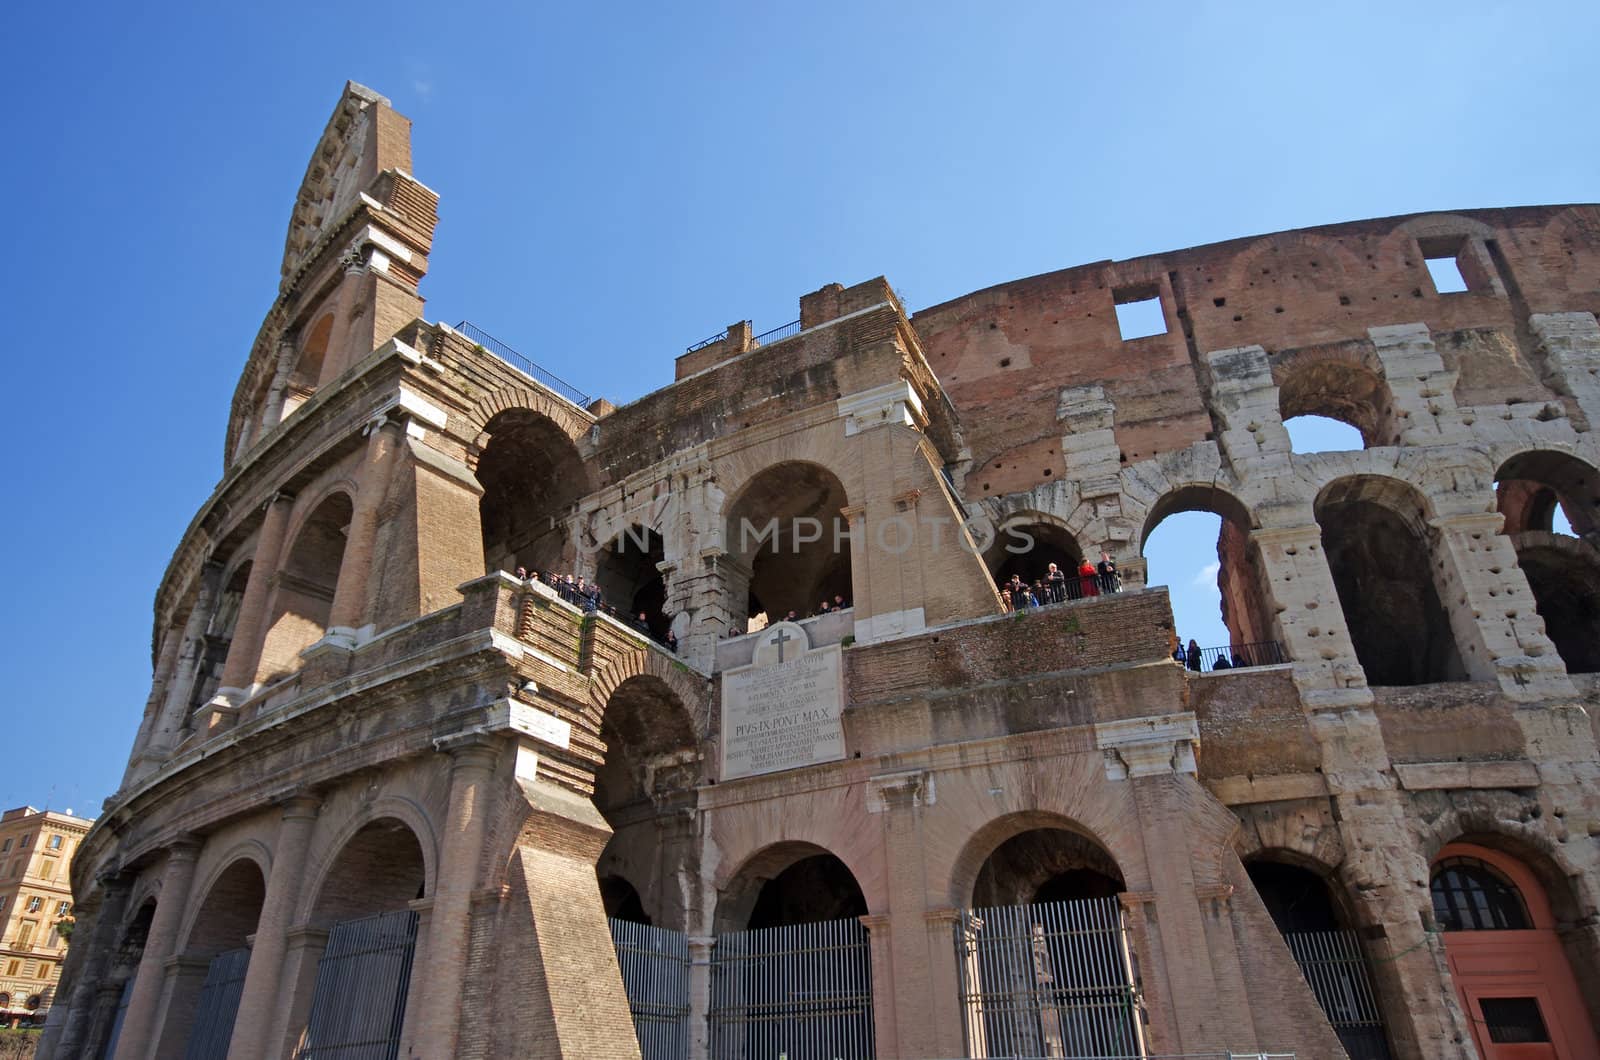 ROME, ITALY - MARCH 10: Rome amphitheatre, Colosseum ruin is the favorite destination of Rome on March 10, 2011 in Rome, Italy